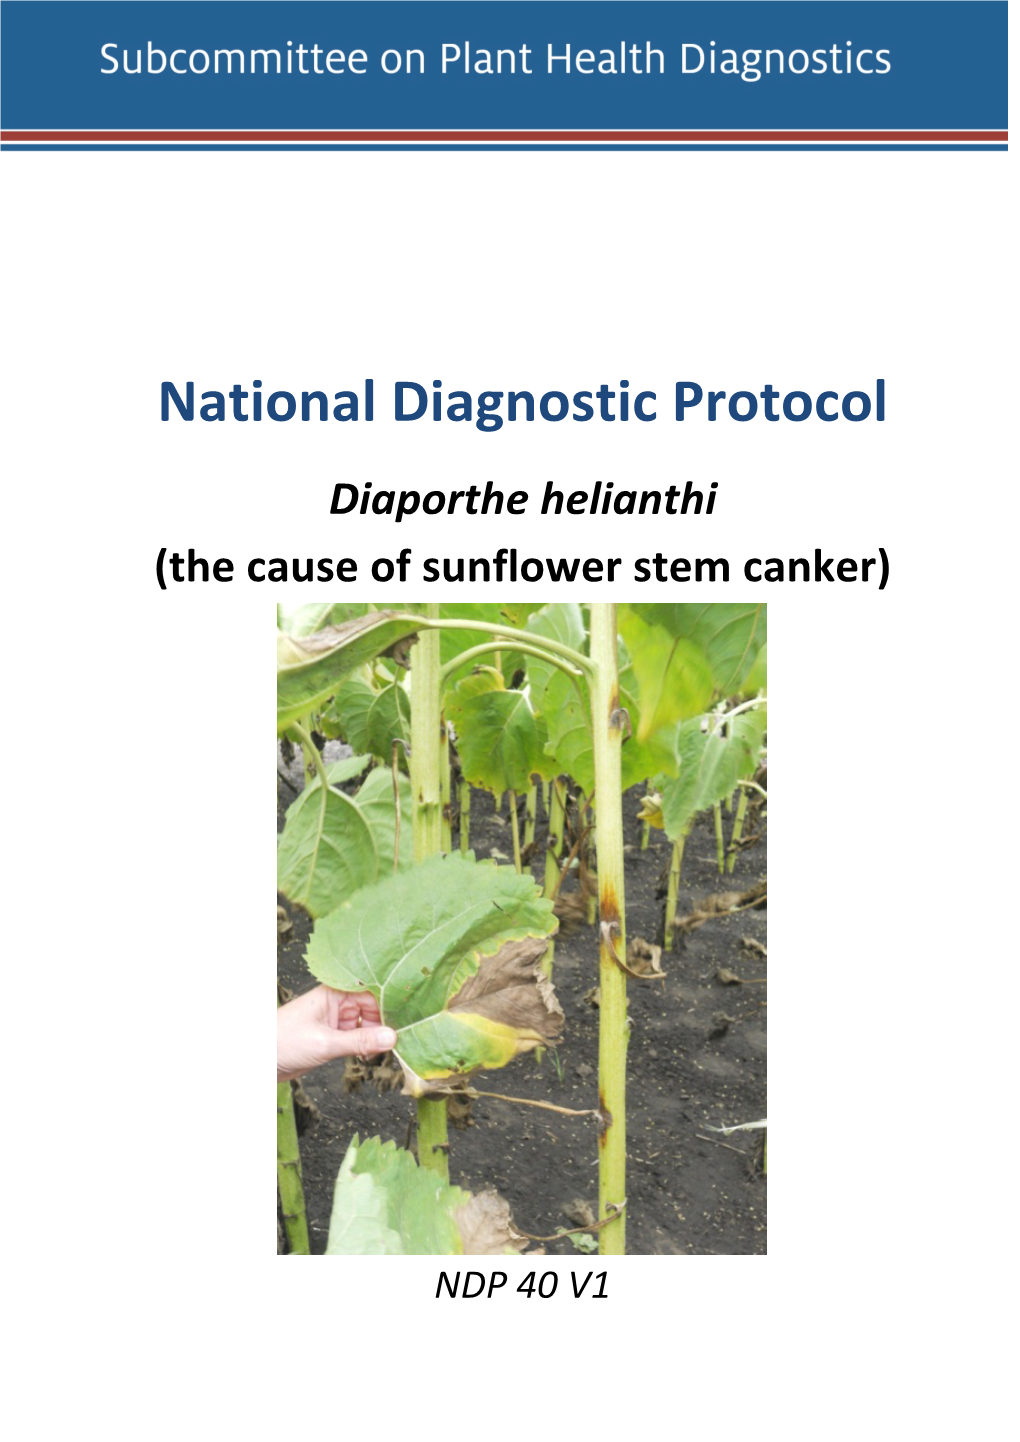 NDP 40 Sunflower Stem Canker – Diaporthe Helianthi(1.62MB)